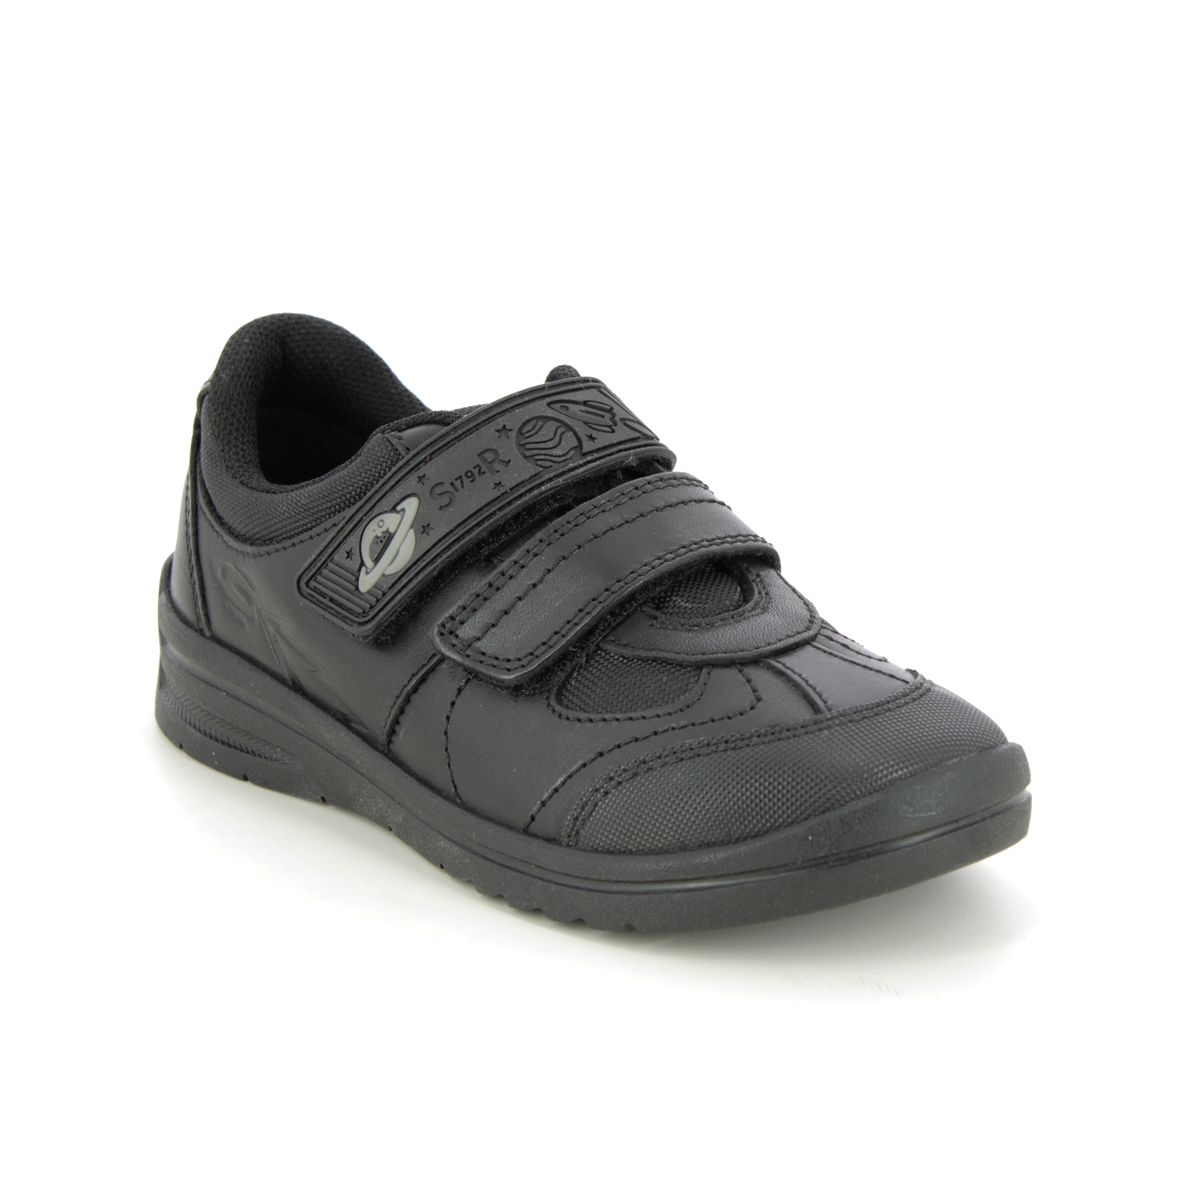 Start Rite - Rocket 2V In Black Leather 2797-75E In Size 4 In Plain Black Leather For School Boys Shoes  In Black Leather For kids